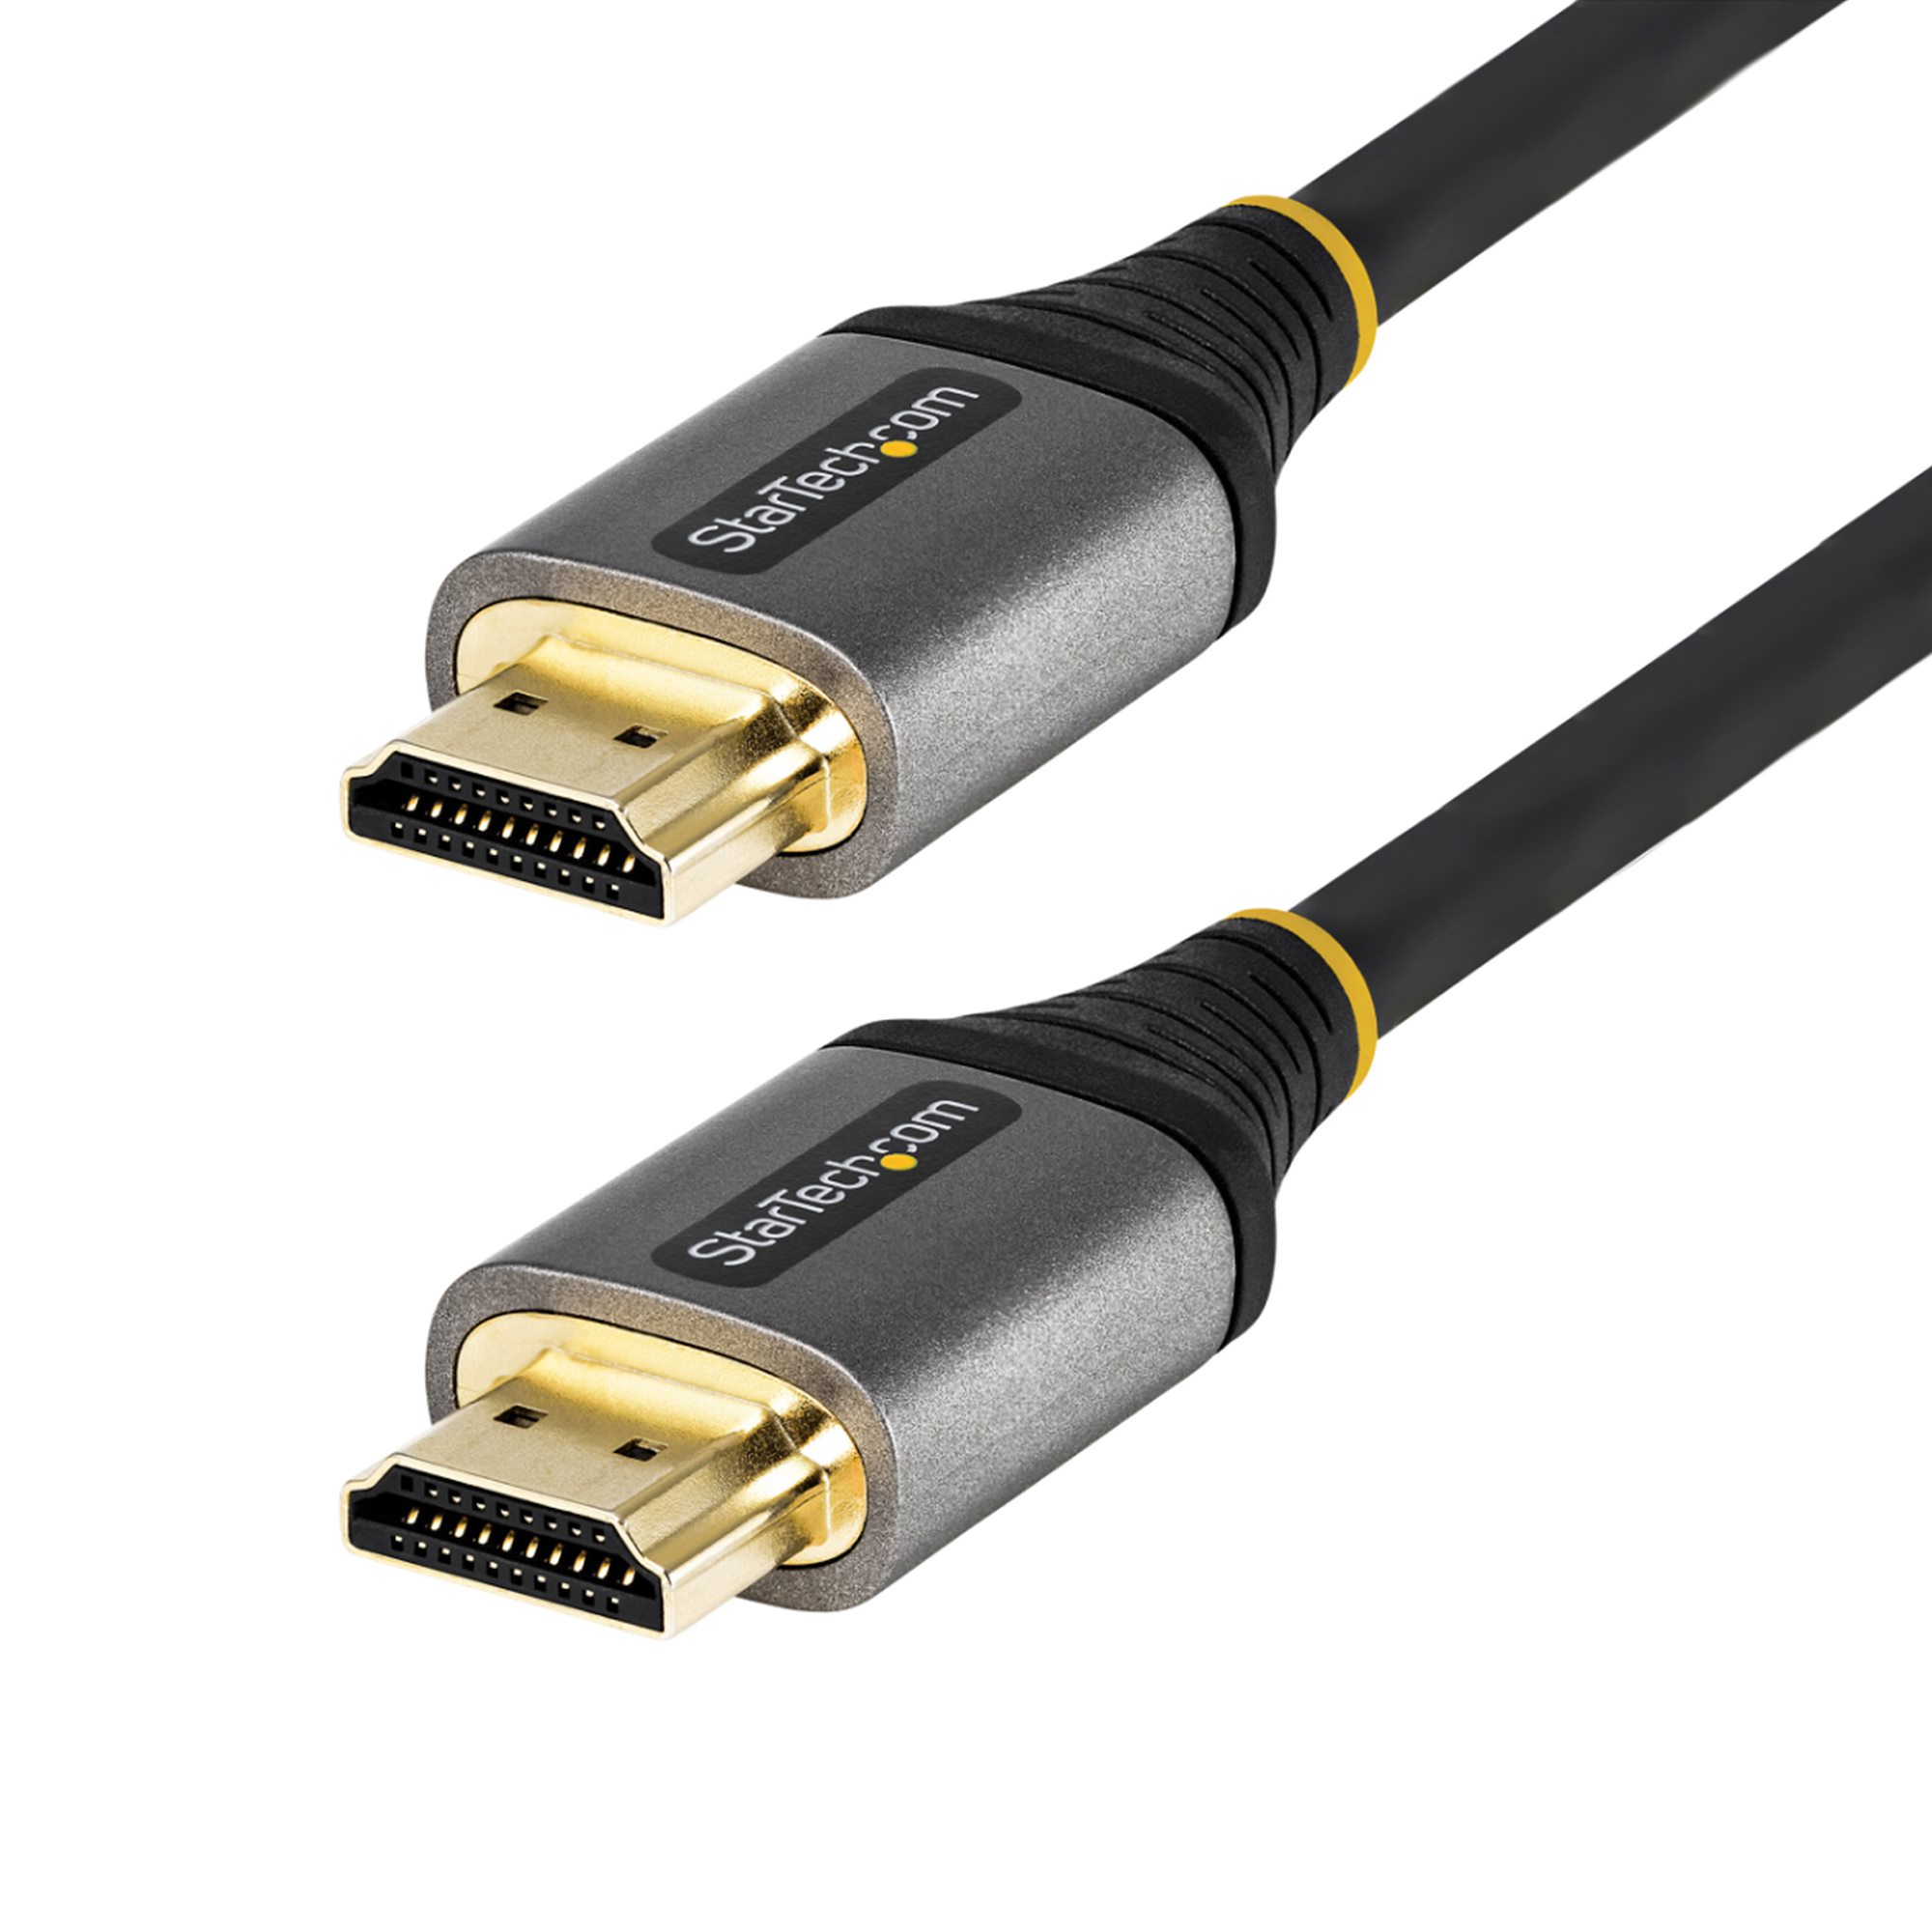 Hare Lada Der er en tendens 10ft 3m Certified HDMI 2.0 Cable 4K 60Hz - HDMI® Cables & HDMI Adapters |  StarTech.com